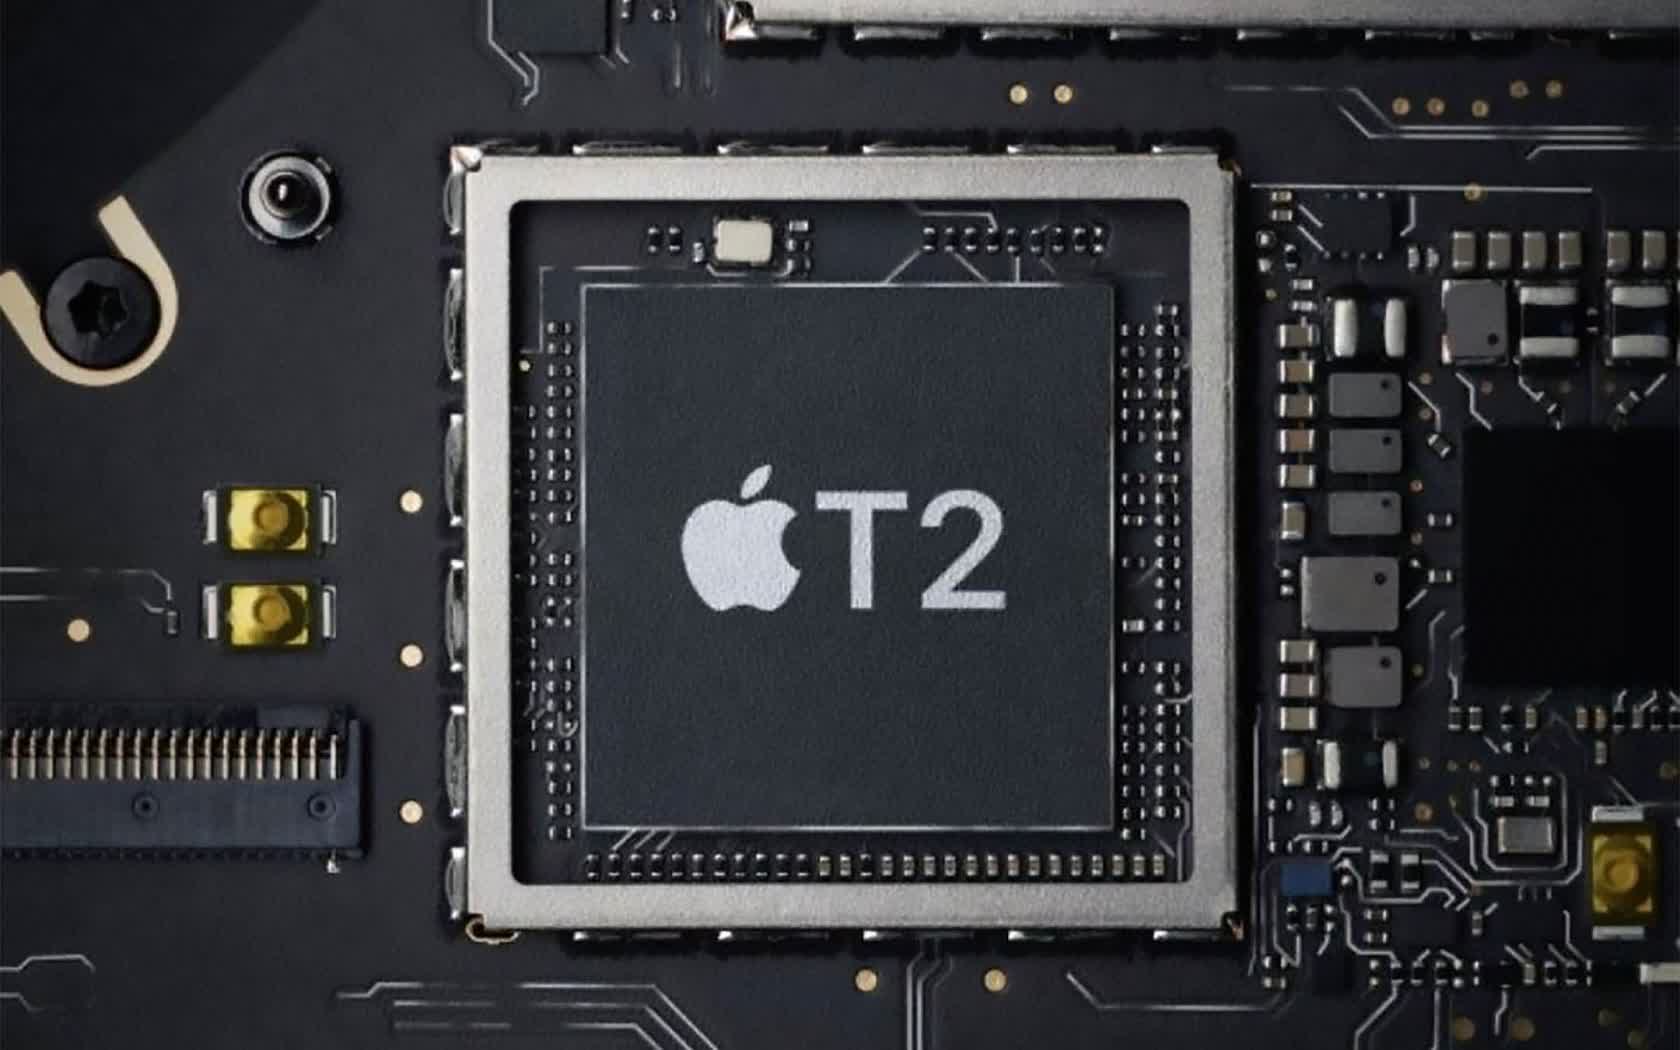 Two iPhone jailbreaks can be used to hack the T2 security chip on newer Macs